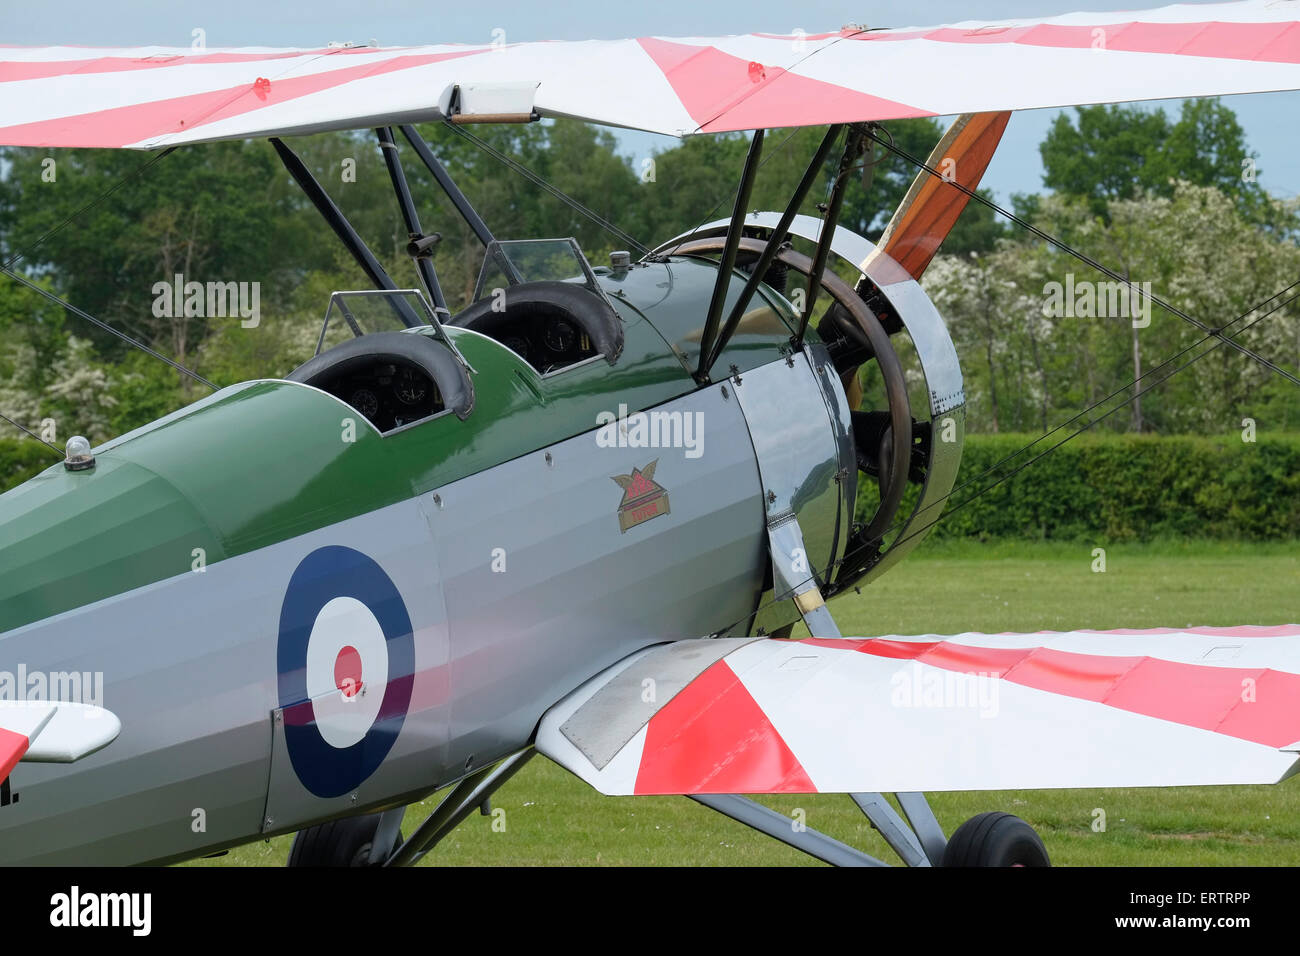 A 1931 Avro 621 Tutor training aircraft of the Shuttleworth collection at Old Warden airfield, Bedfordshire, England. Stock Photo